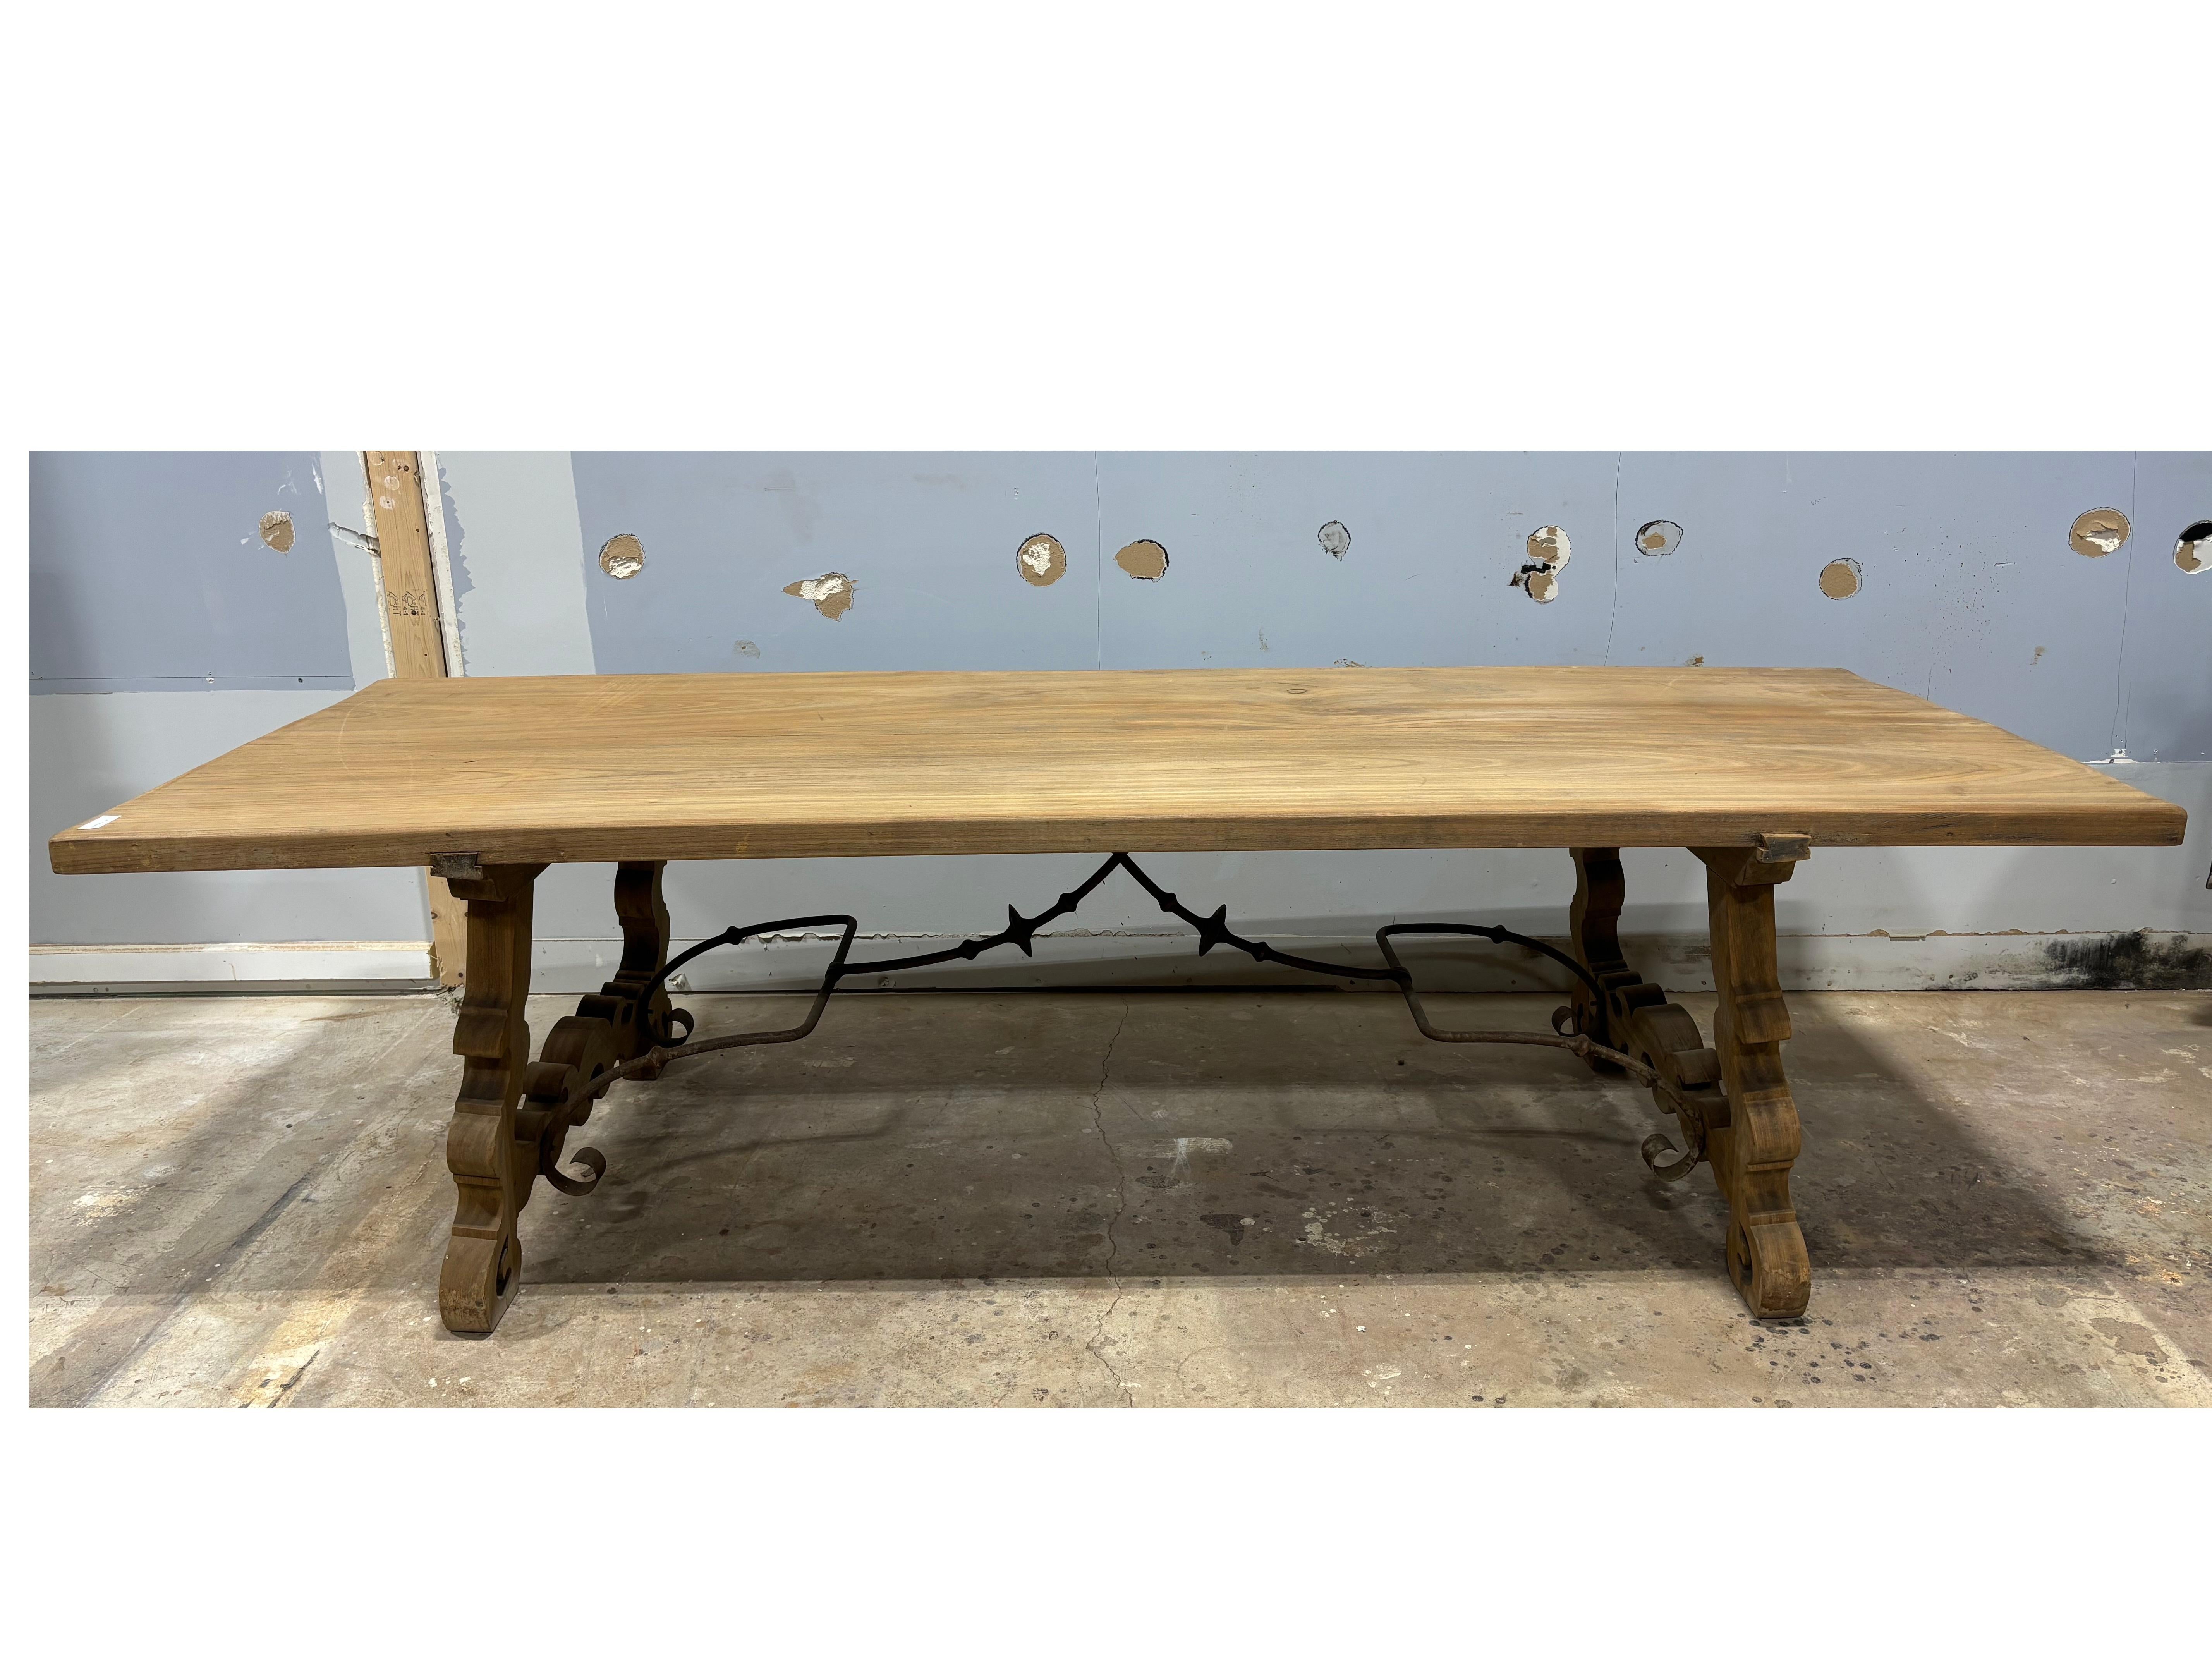 Exceptional Long and large Table with a beautiful Iron work at the base.